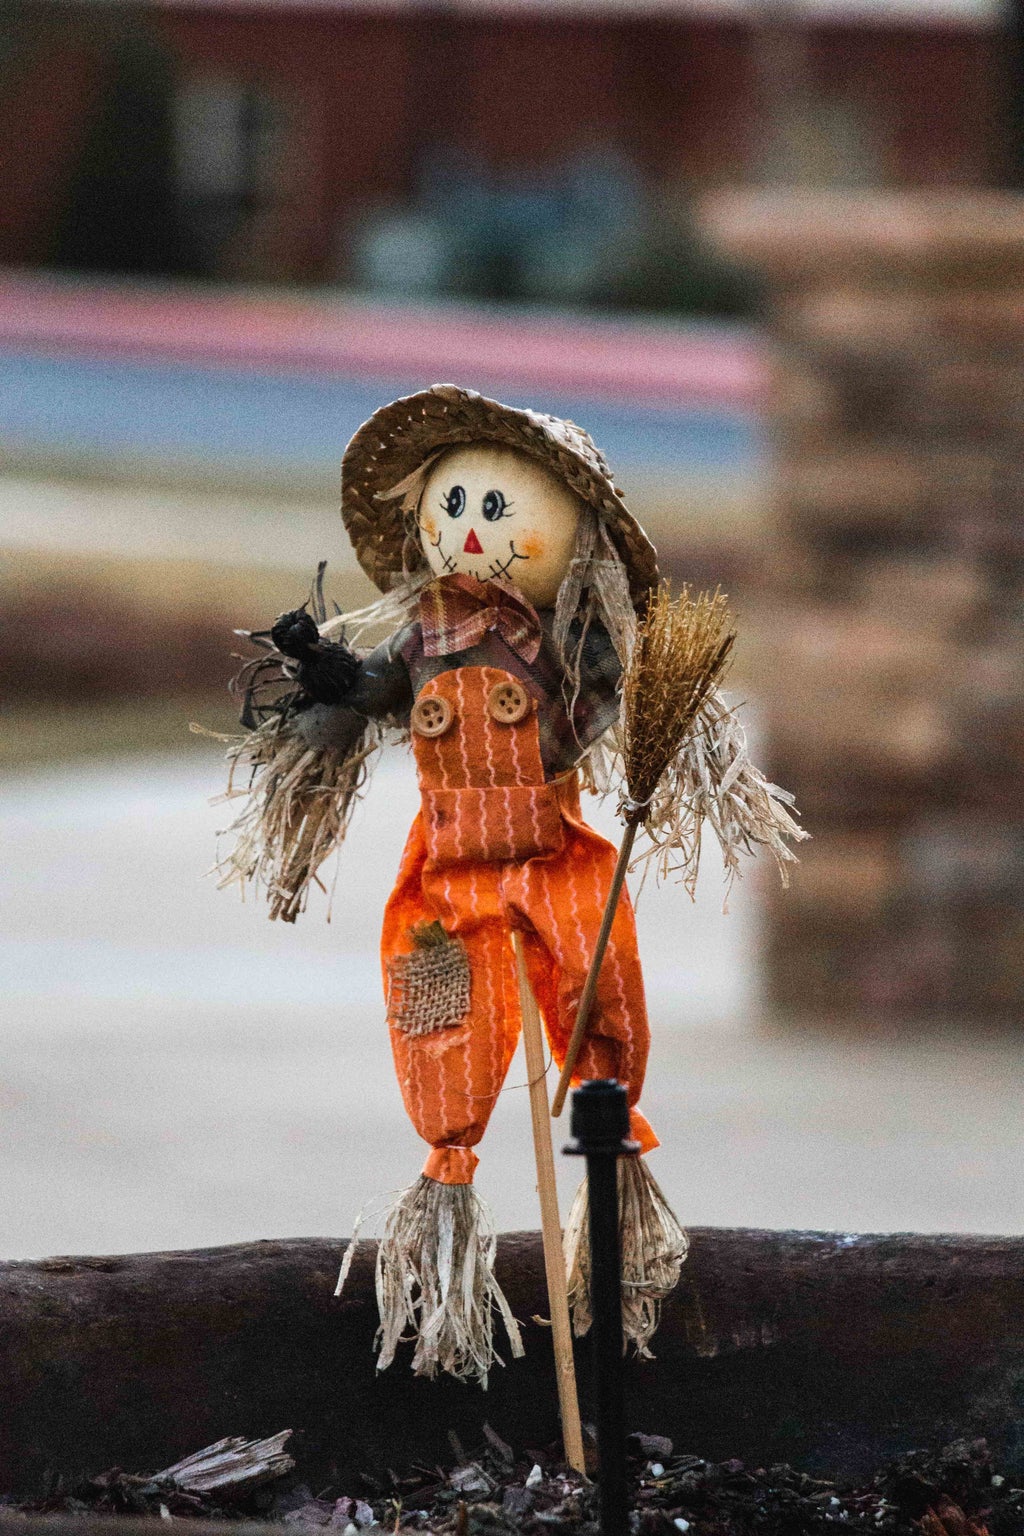 scarecrow in a planter?width=1024&height=1024&fit=cover&auto=webp